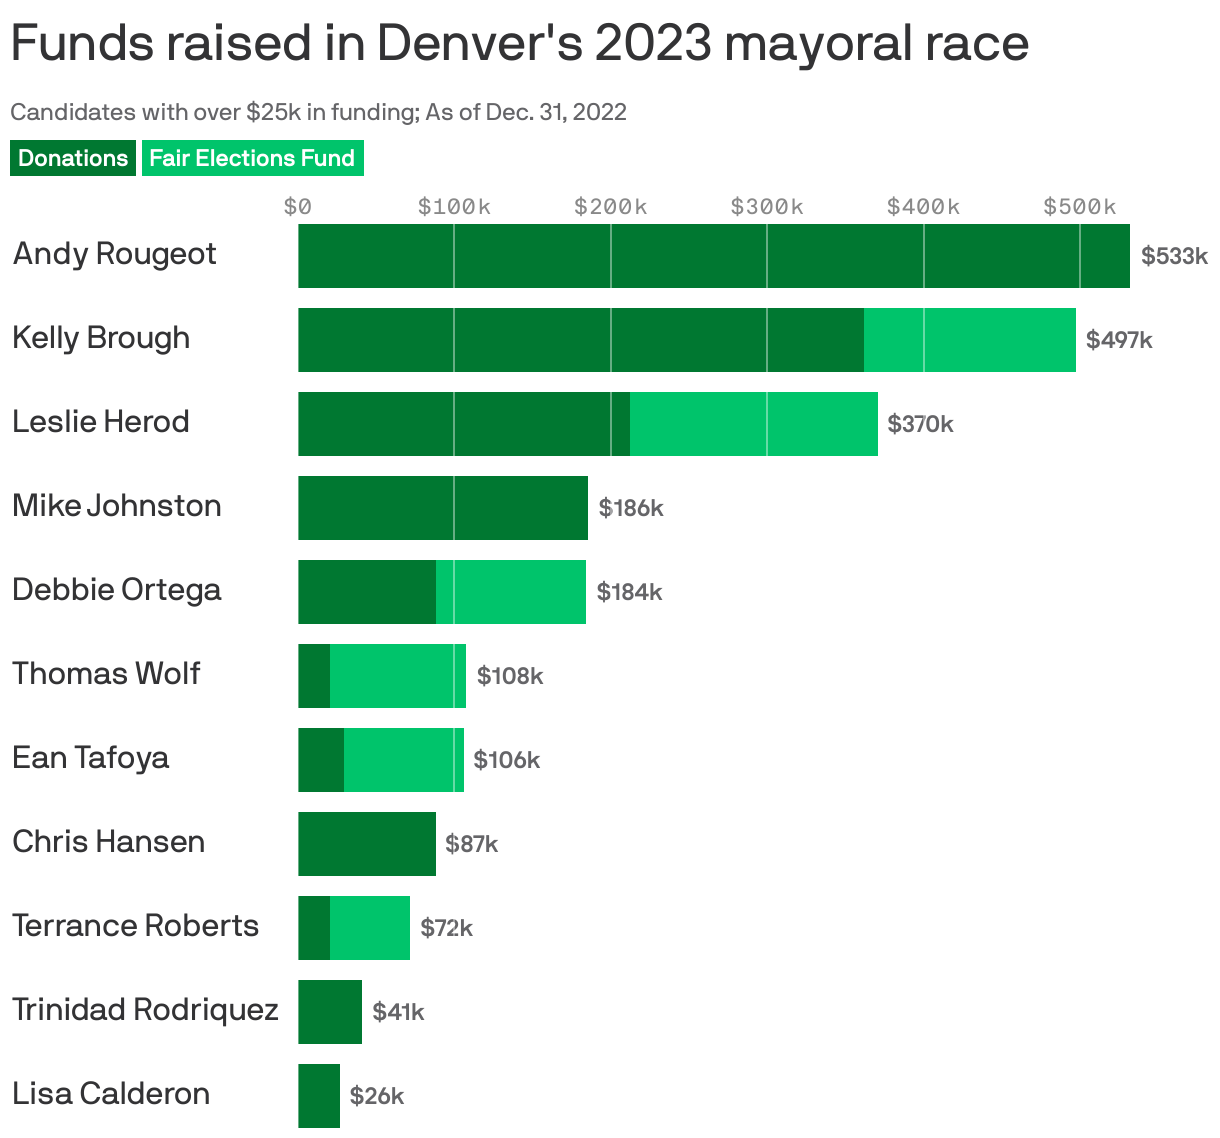 Funds raised in Denver's 2023 mayoral race